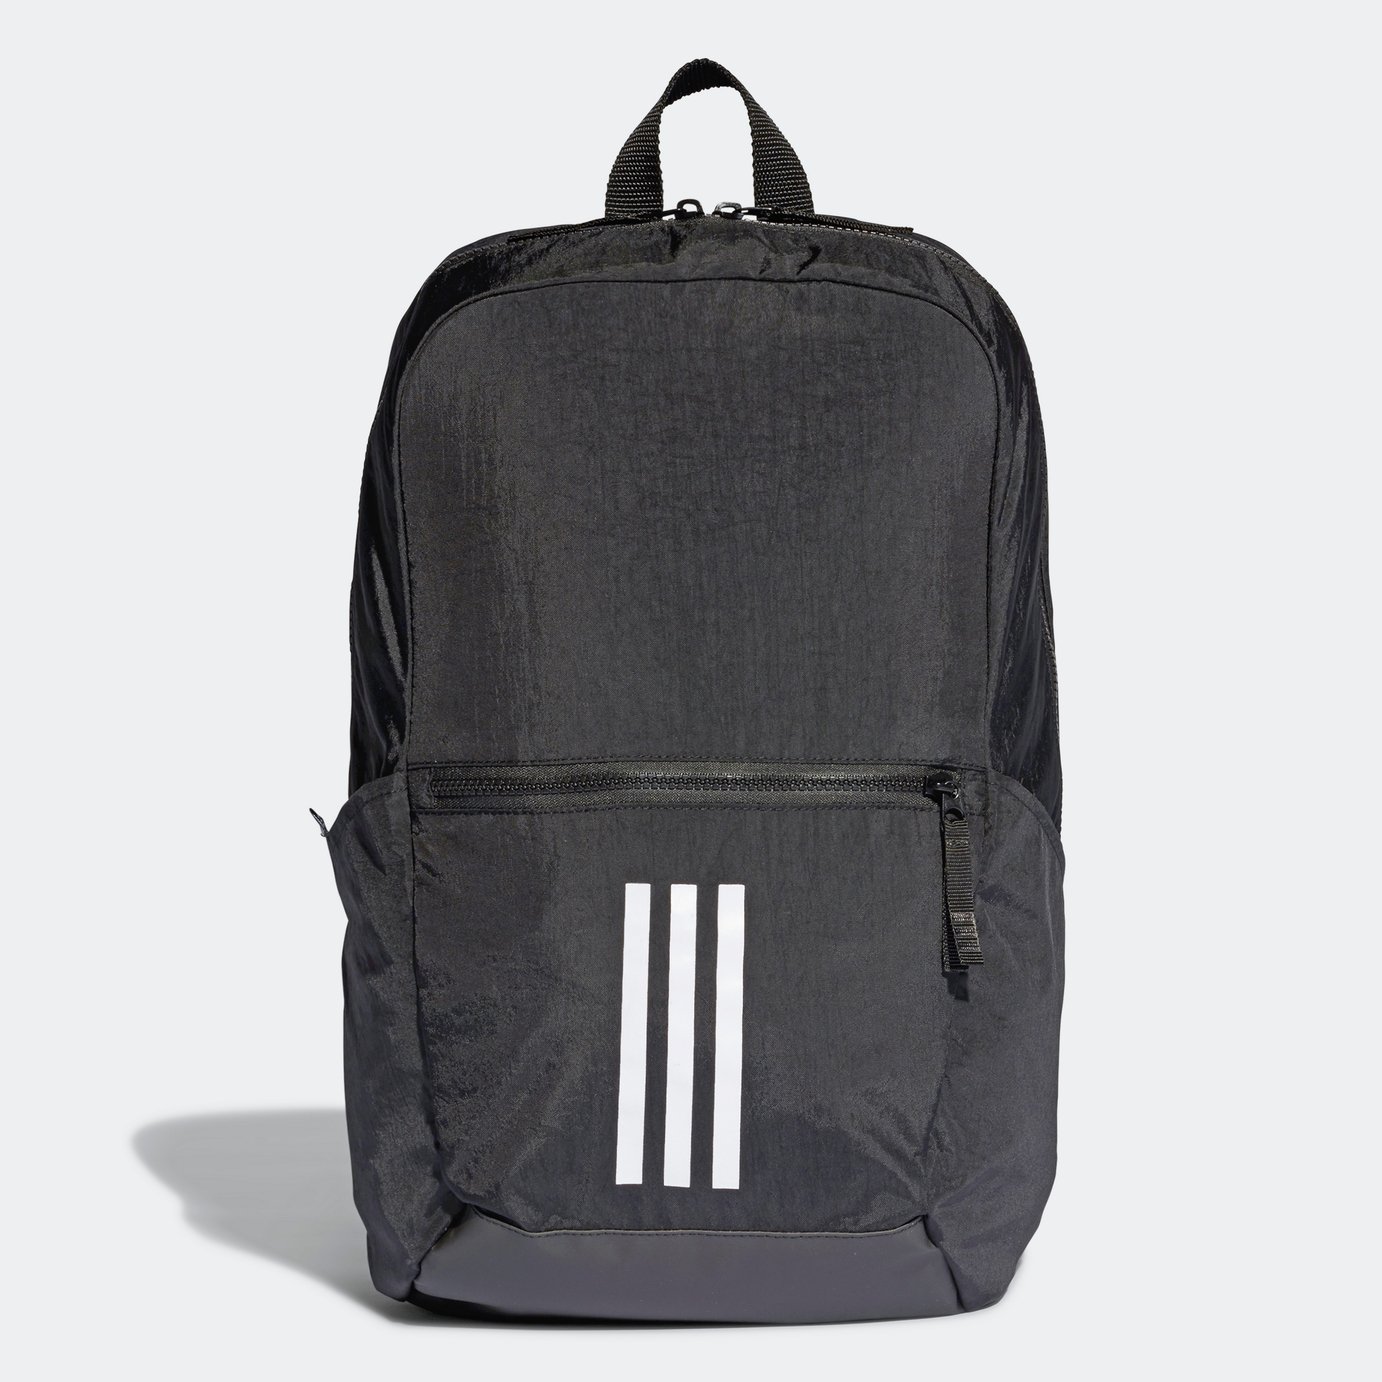 Adidas Parkhood 25.5L Backpack - Black and White